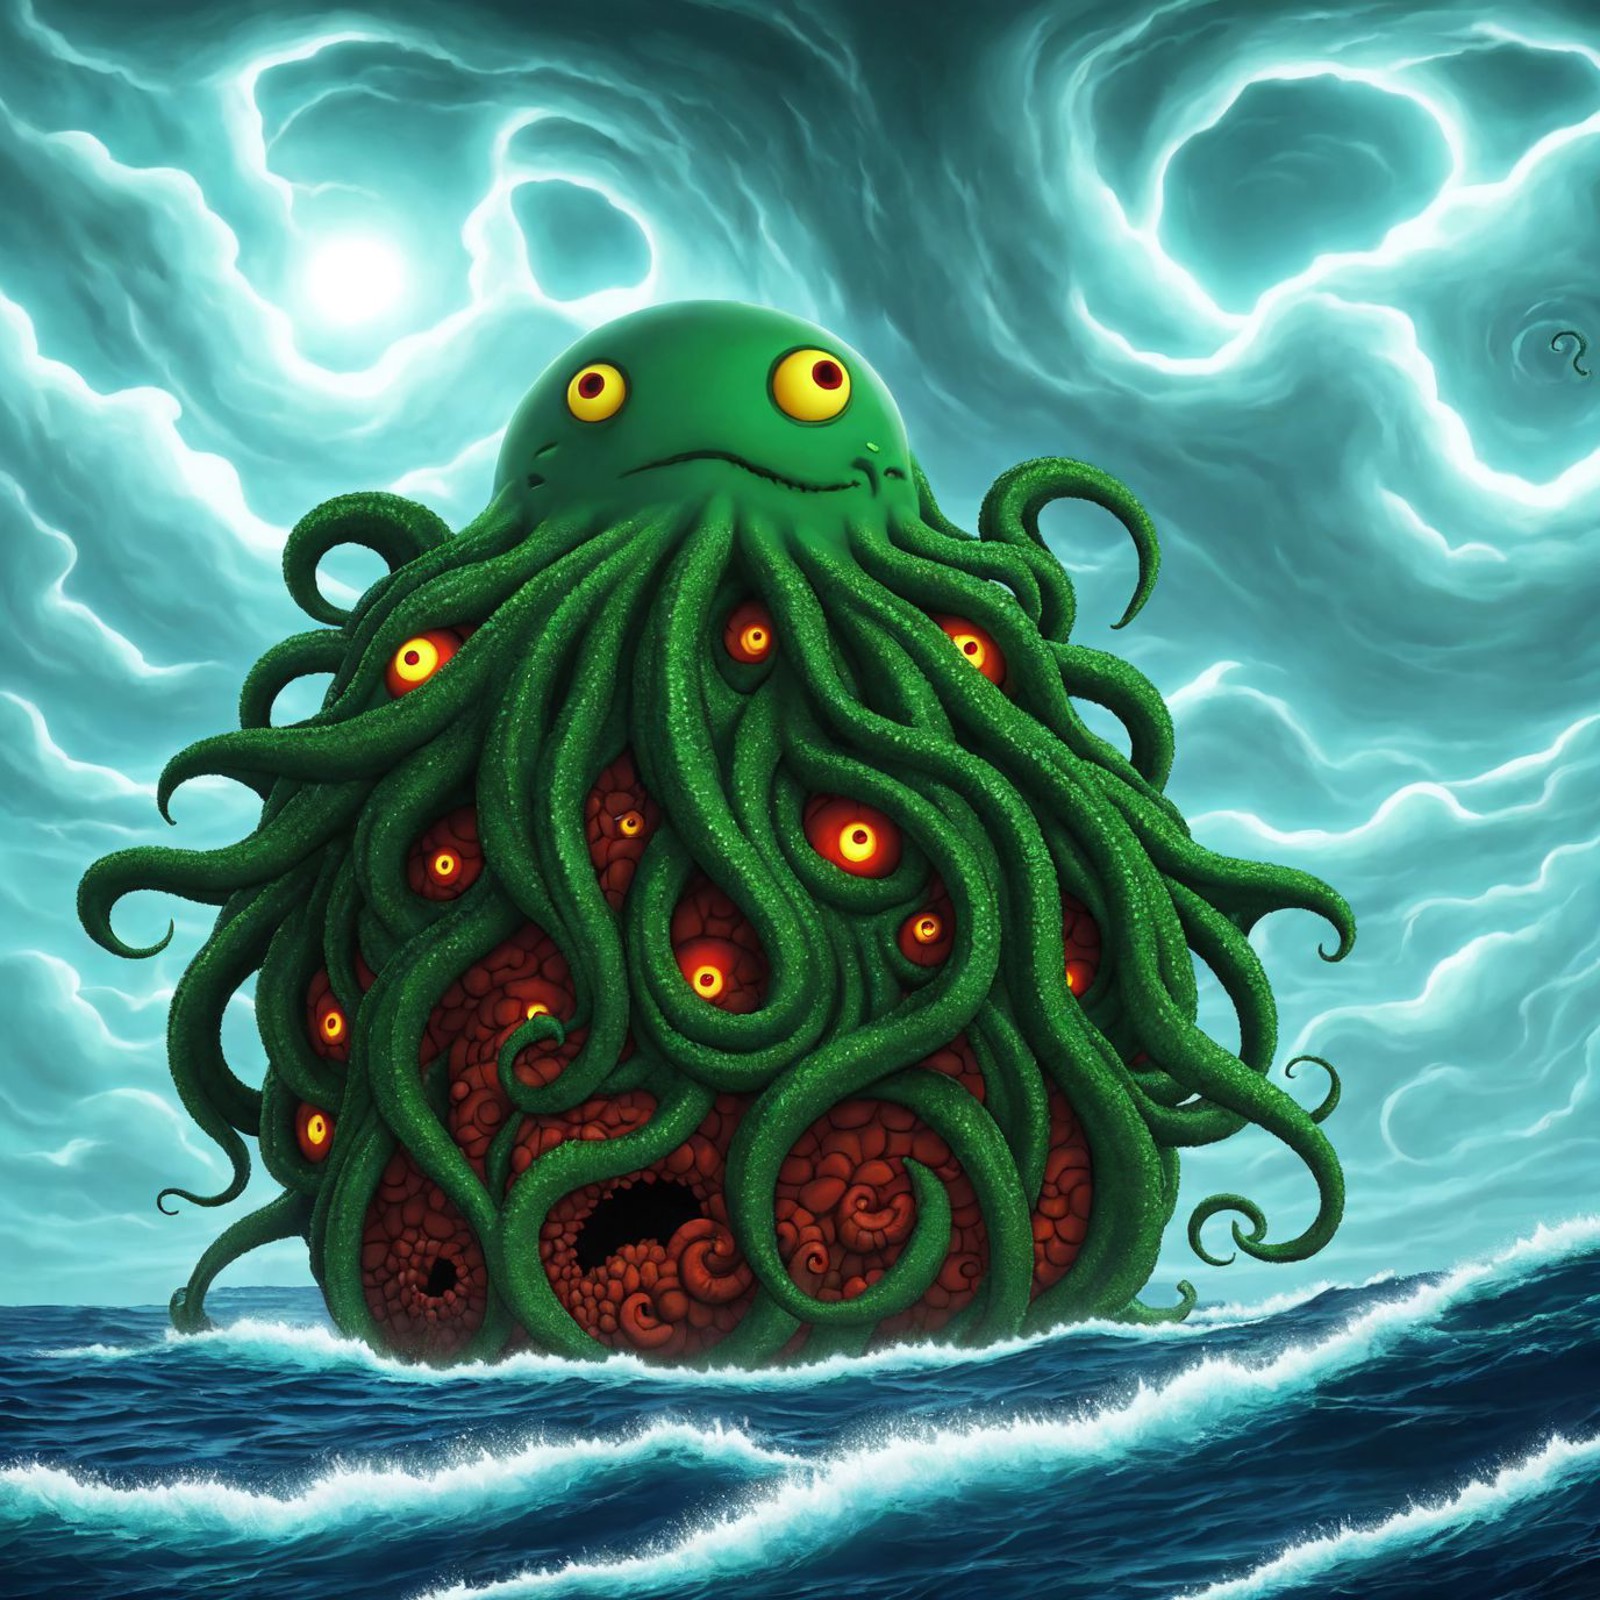 00032-20230531093103-559-Cthulhu rising from the sea in a great storm, based on H.P Lovecraft stories, Naoto Hattori.jpg